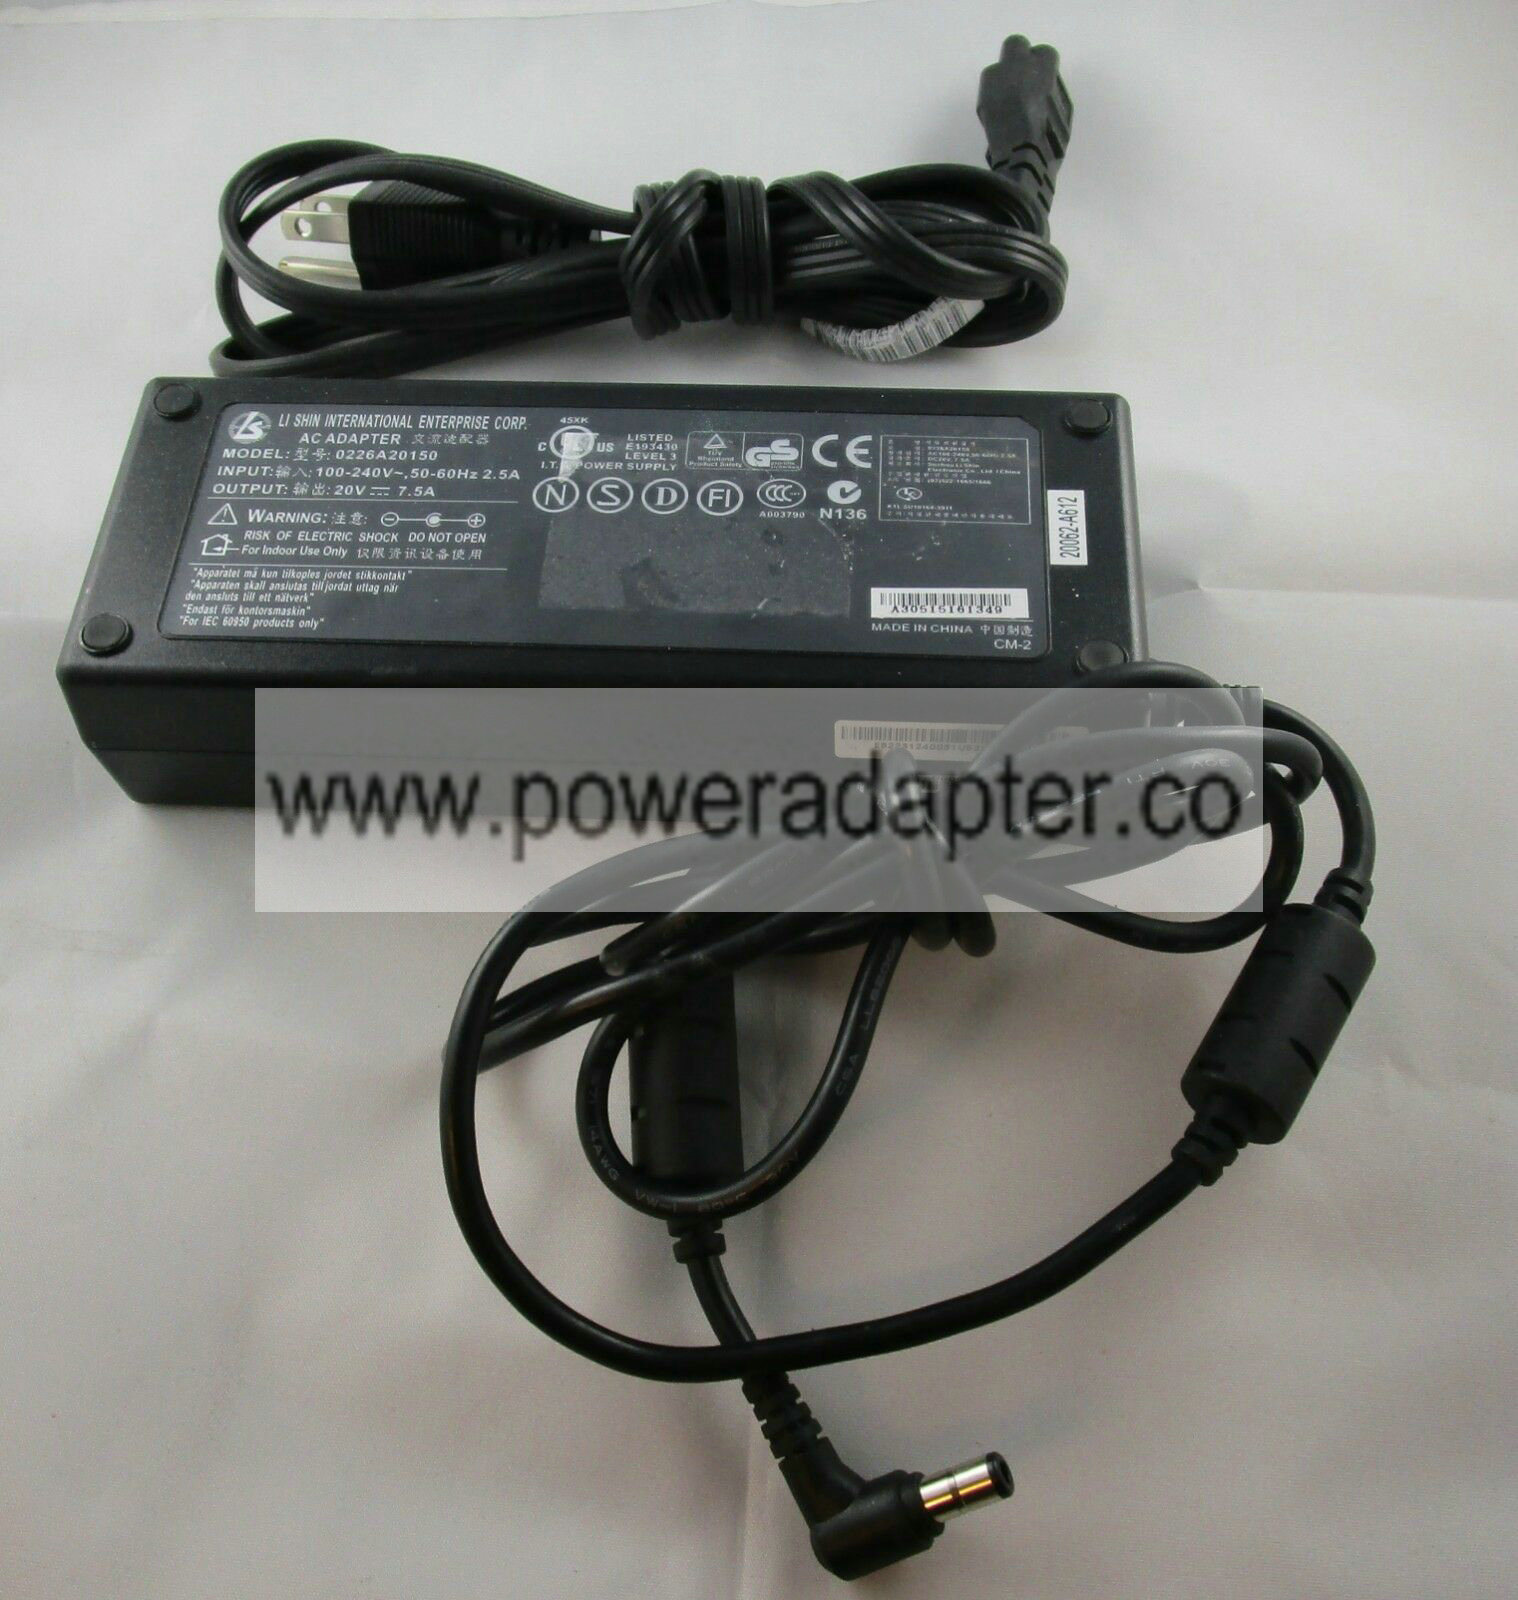 LiShin 20V 7.5A 150W AC Power Adapter 0226A20150 Bundled Items: Power Cable MPN: 0226A20150 Max. Output Power: 150 W